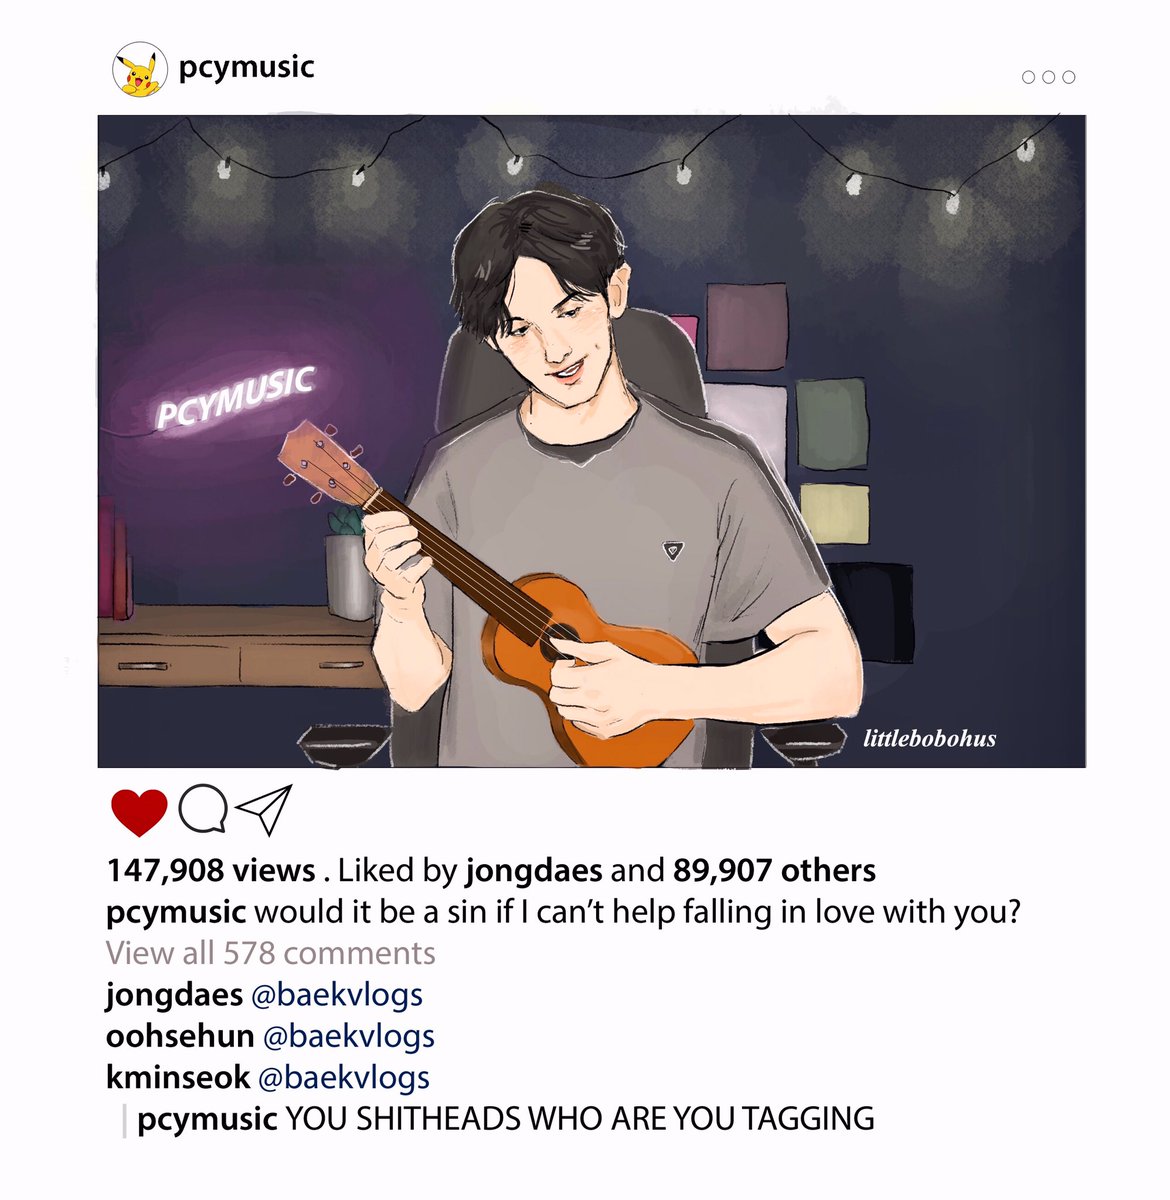 chanbaek AU where coversinger!chanyeol has a crush on vlogger!BH and his friends like to tease him